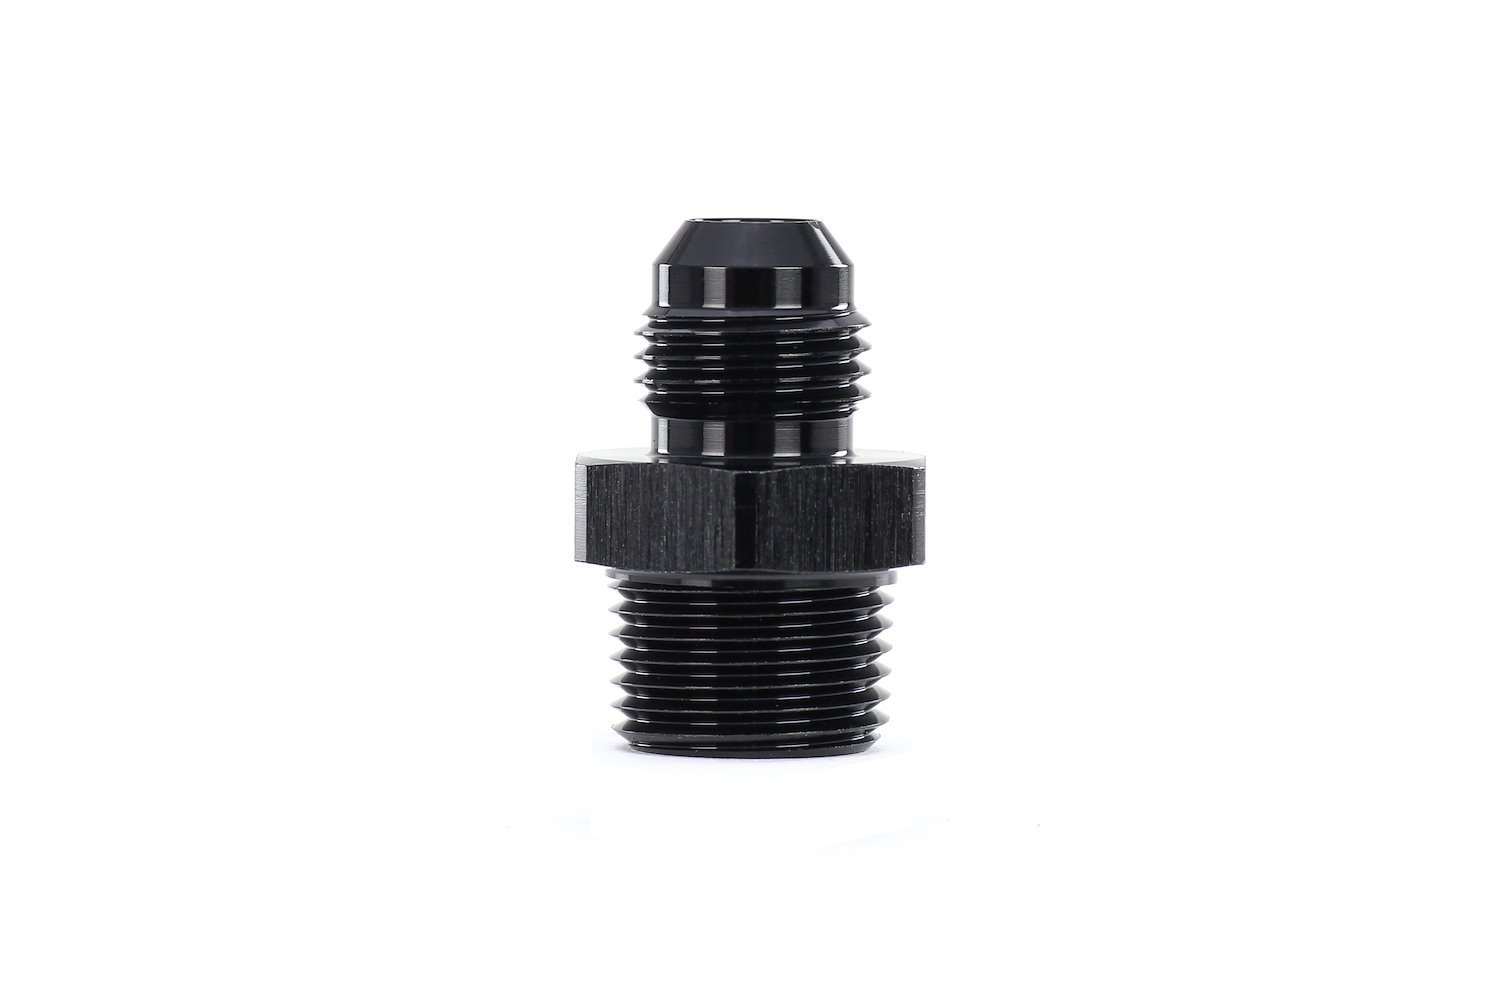 AN8166xM2215 AN Flare to Metric Adapter, Convert Metric Female Threads To Male An Flare